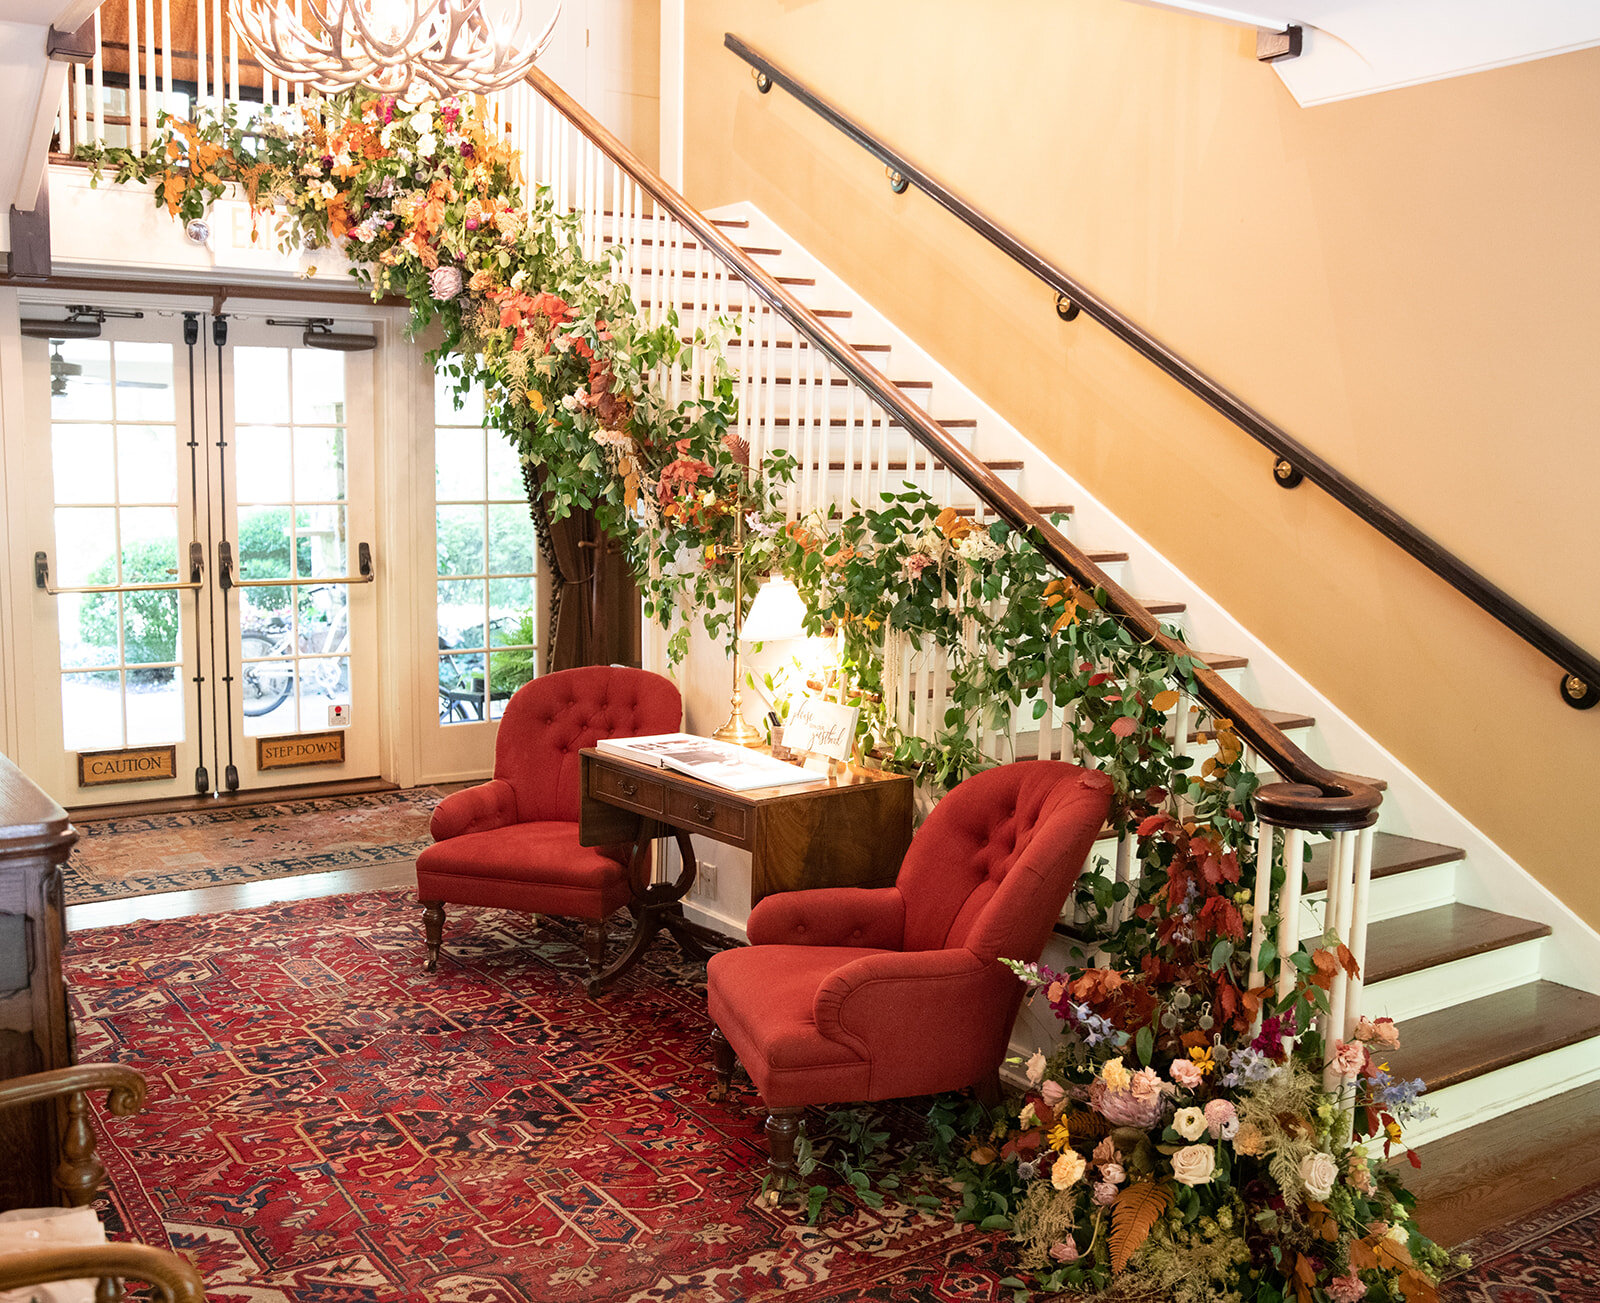 Early fall wedding floral design at RT Lodge. Lush, untamed installation growing up the staircase with wildflowers, protea, fruiting branches, ranunculus, garden roses, and dried textures.